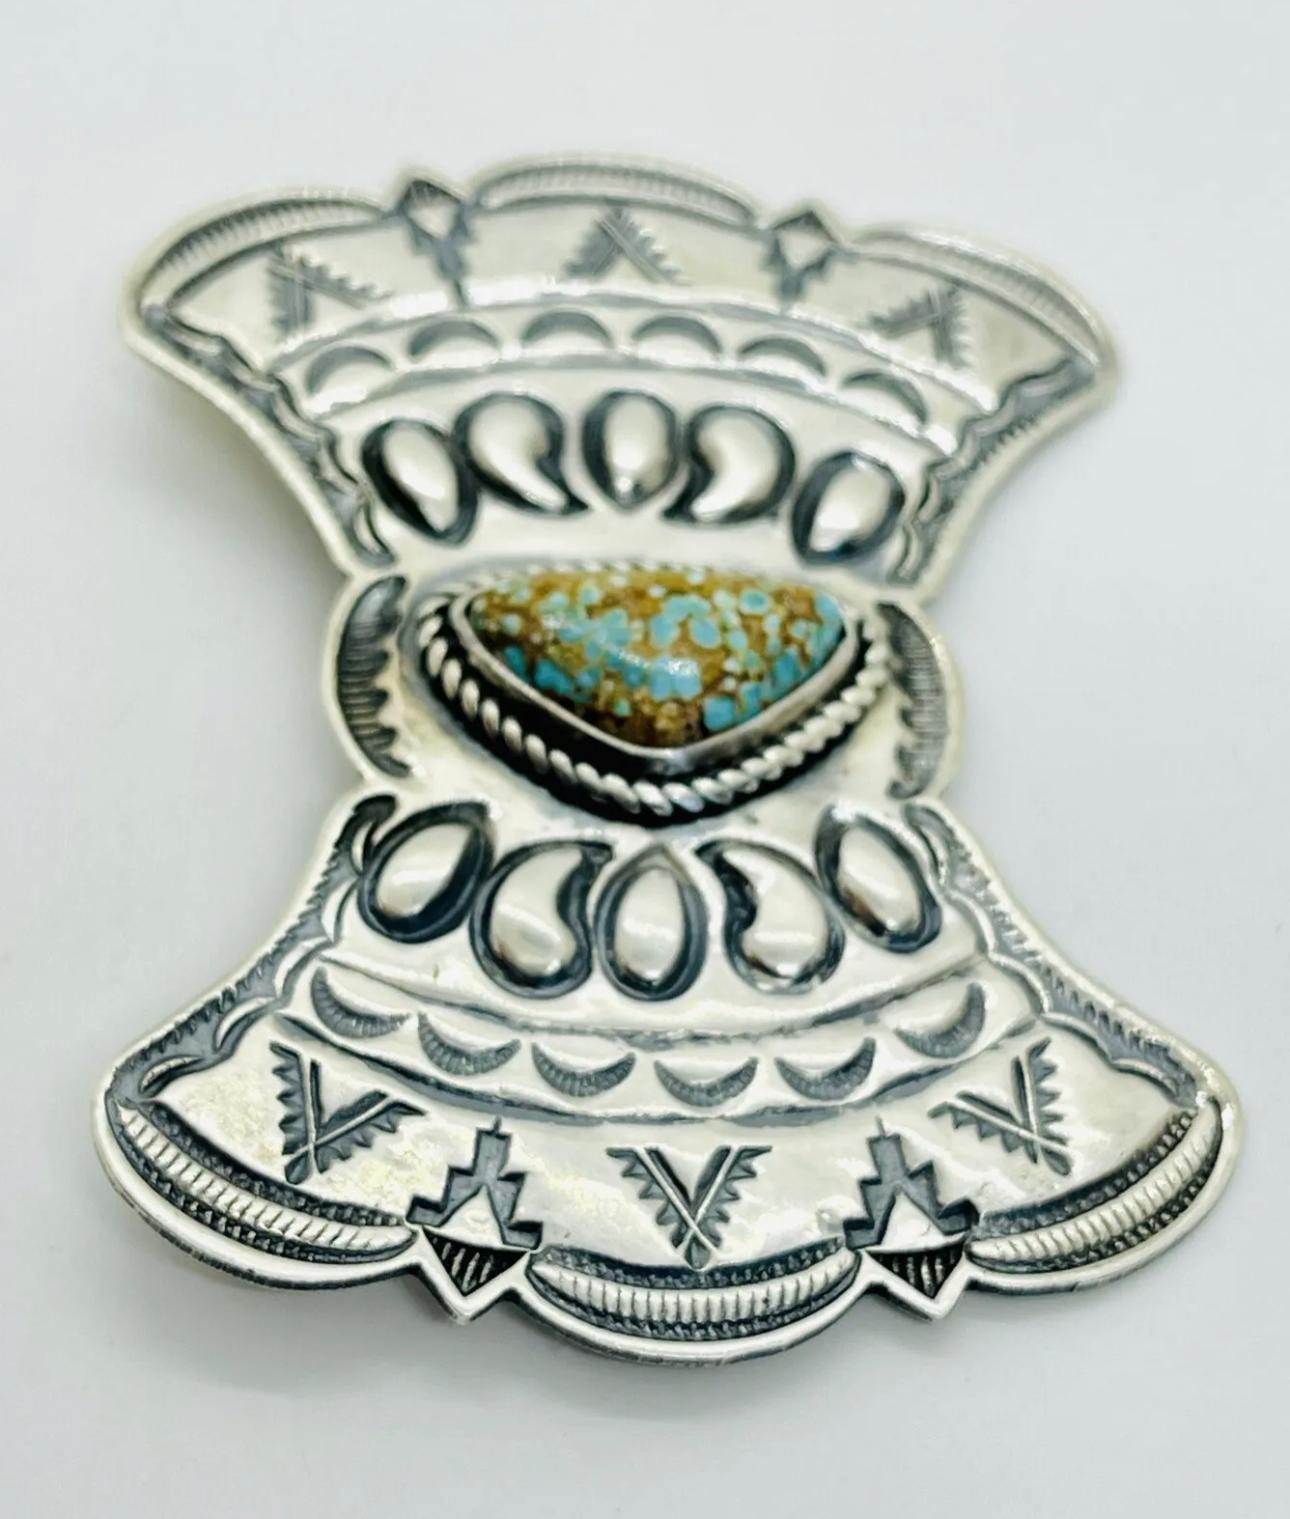 Vintage Signed Native American Navajo Sterling Silver Stampwork Brooch w/ Incredible Fine Ultra High Gem Grade Water Web “Birdseye” Matrix Turquoise Cabochon Brooch by

KIRK SMITH (1957, New Mexico - 2012, New Mexico)

2.75” x 2”

23.3 g

Excellent